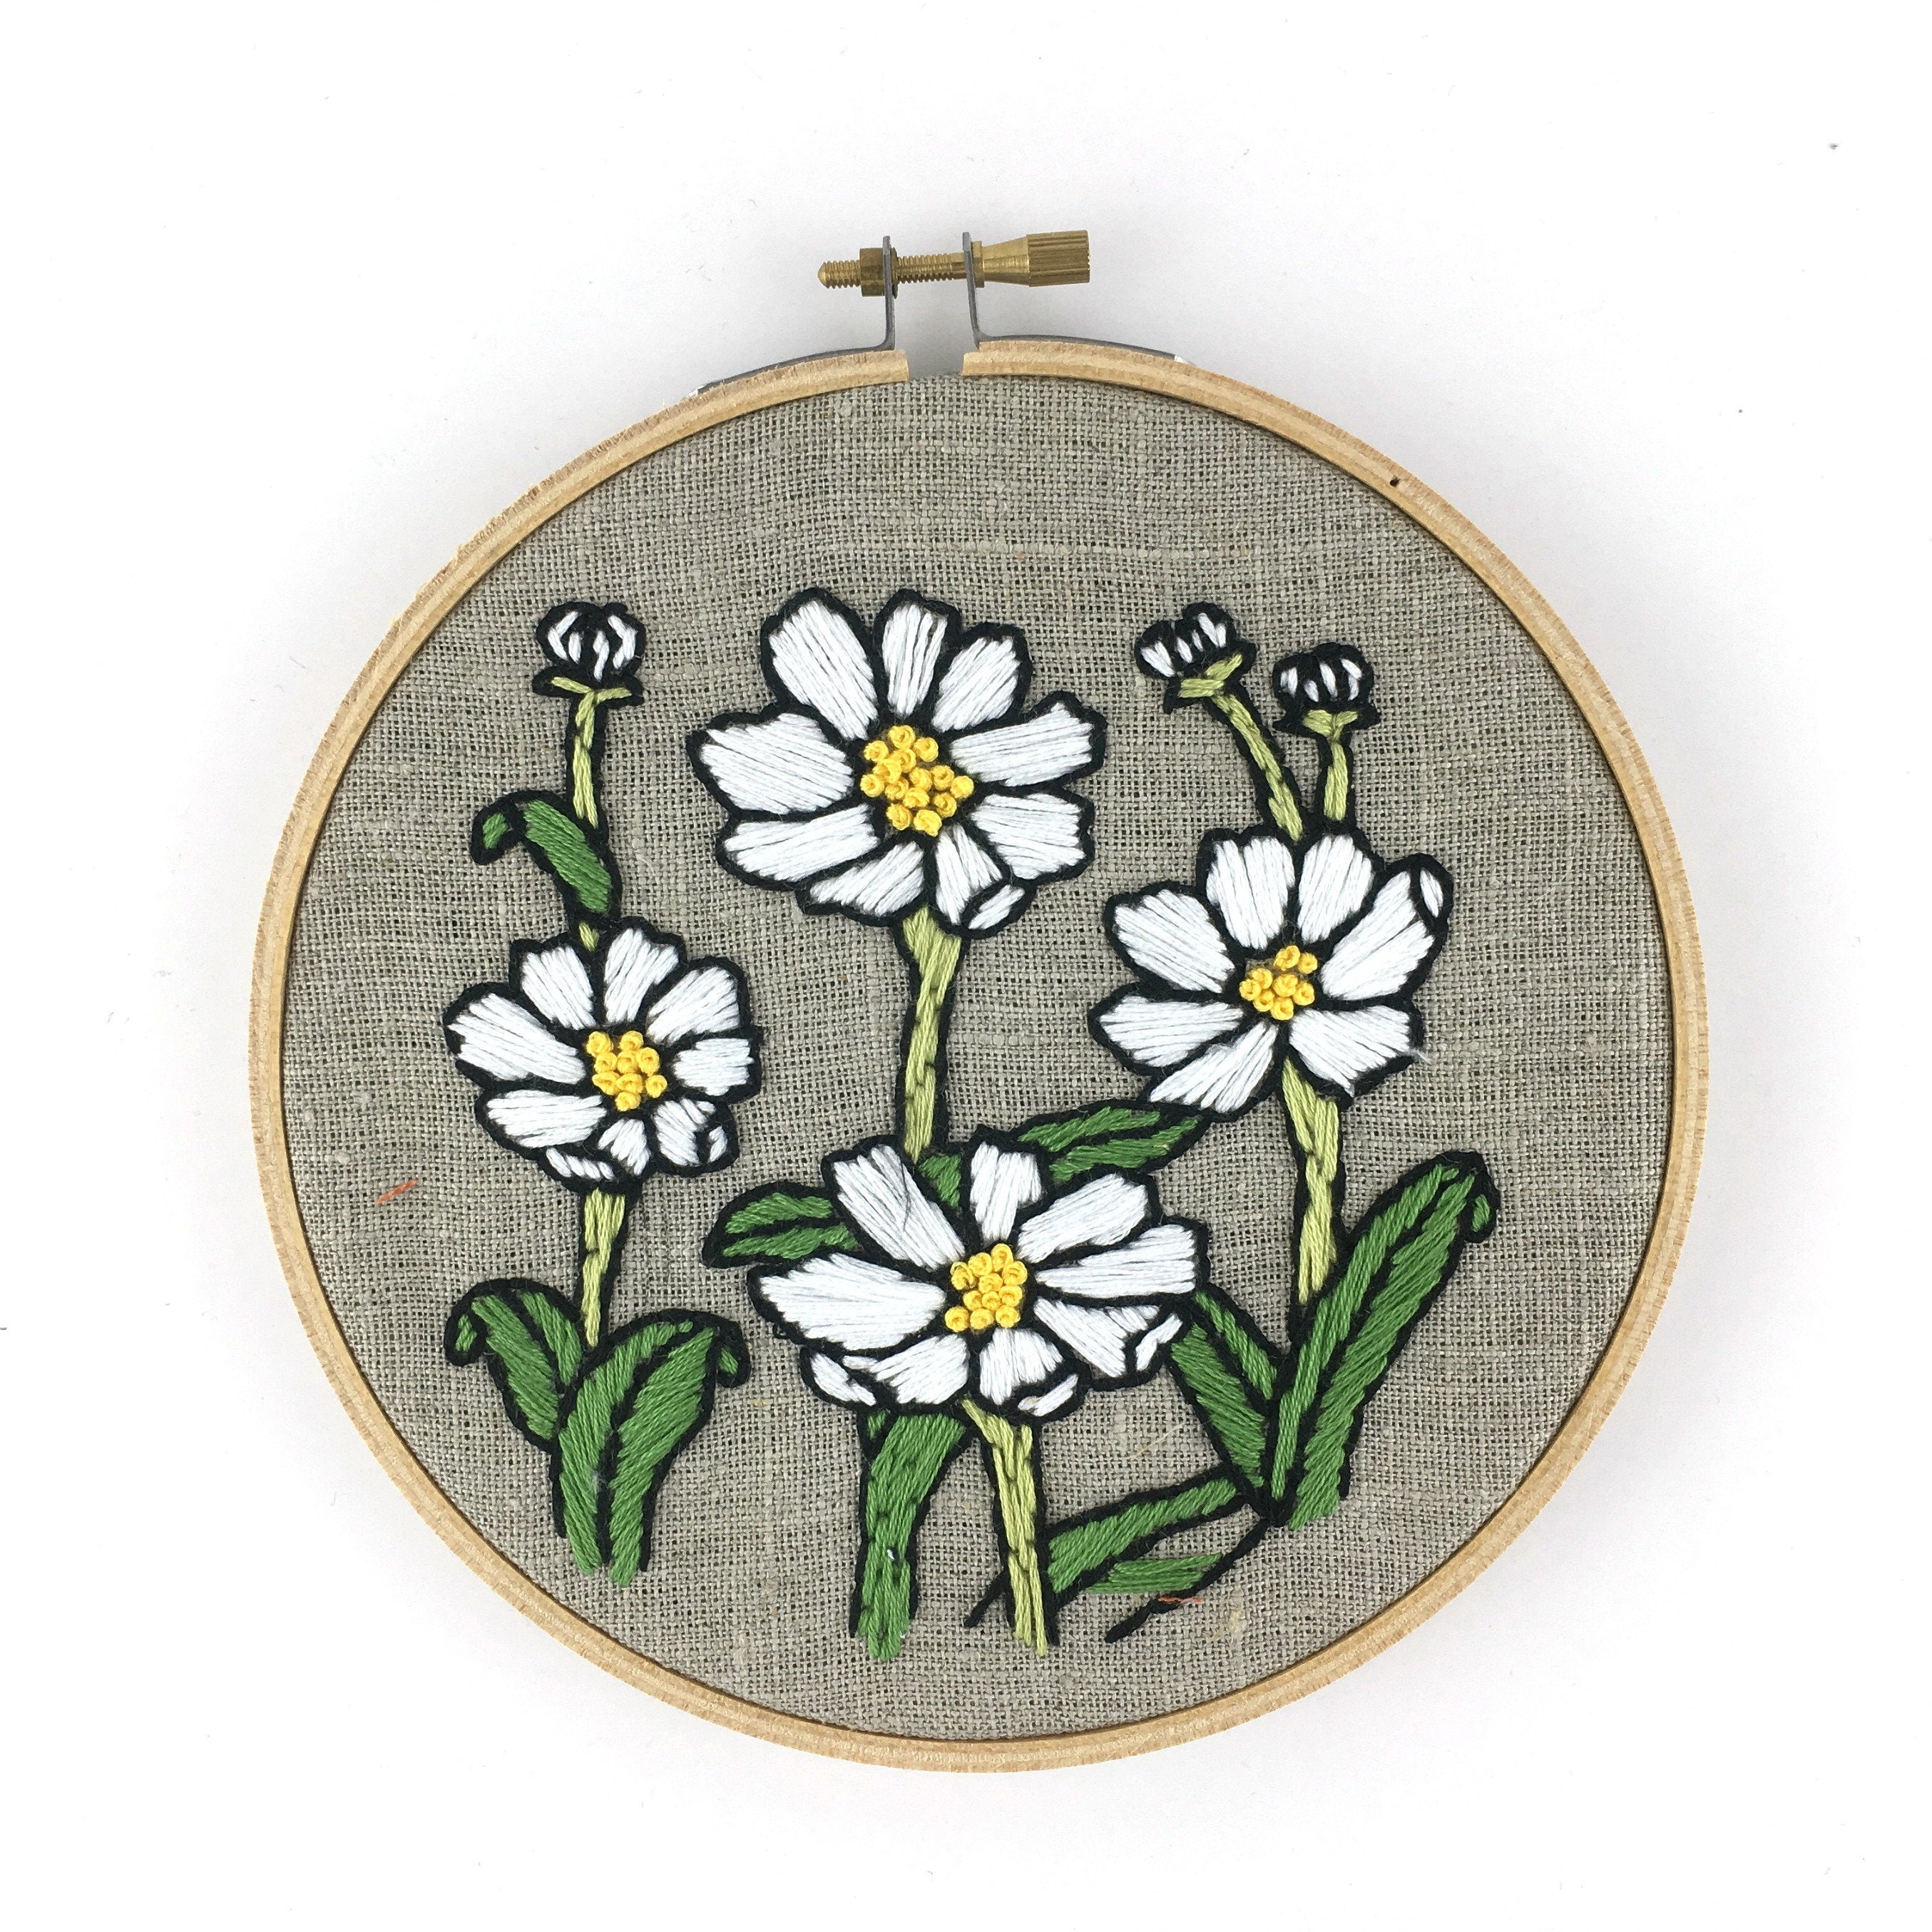 Flower Embroidery Patterns Daisies Embroidery Kit Beginner Floral Embroidery Floral